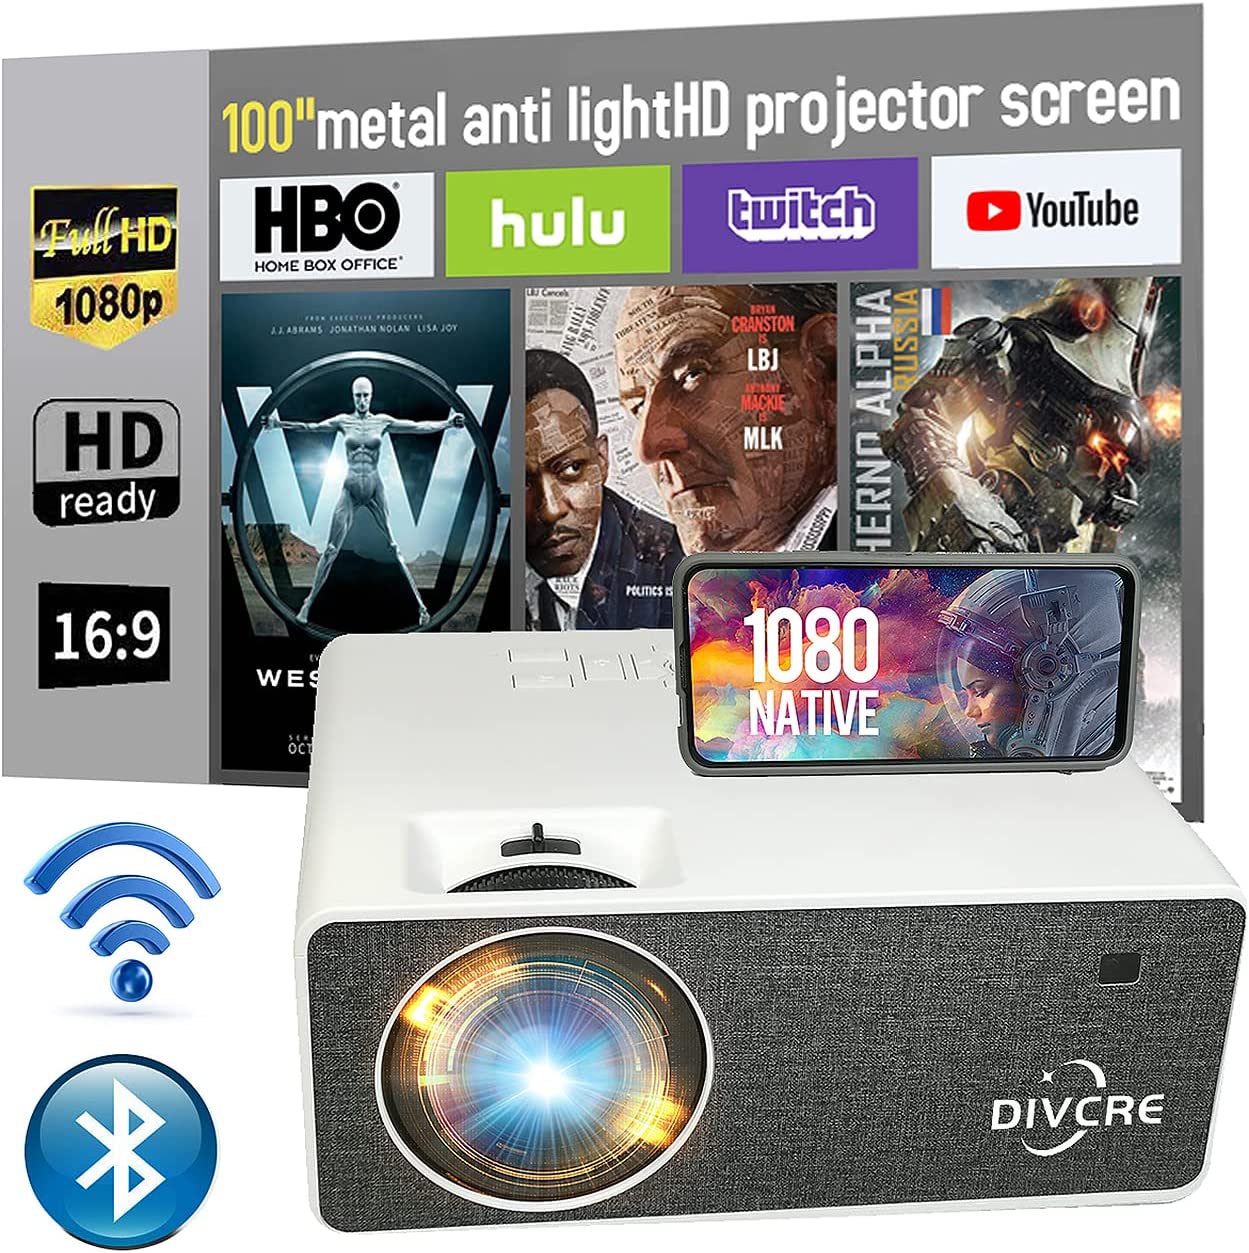 DIVCRE Projector Review, Pros & Cons - 1080P Bluetooth WiFi Projector